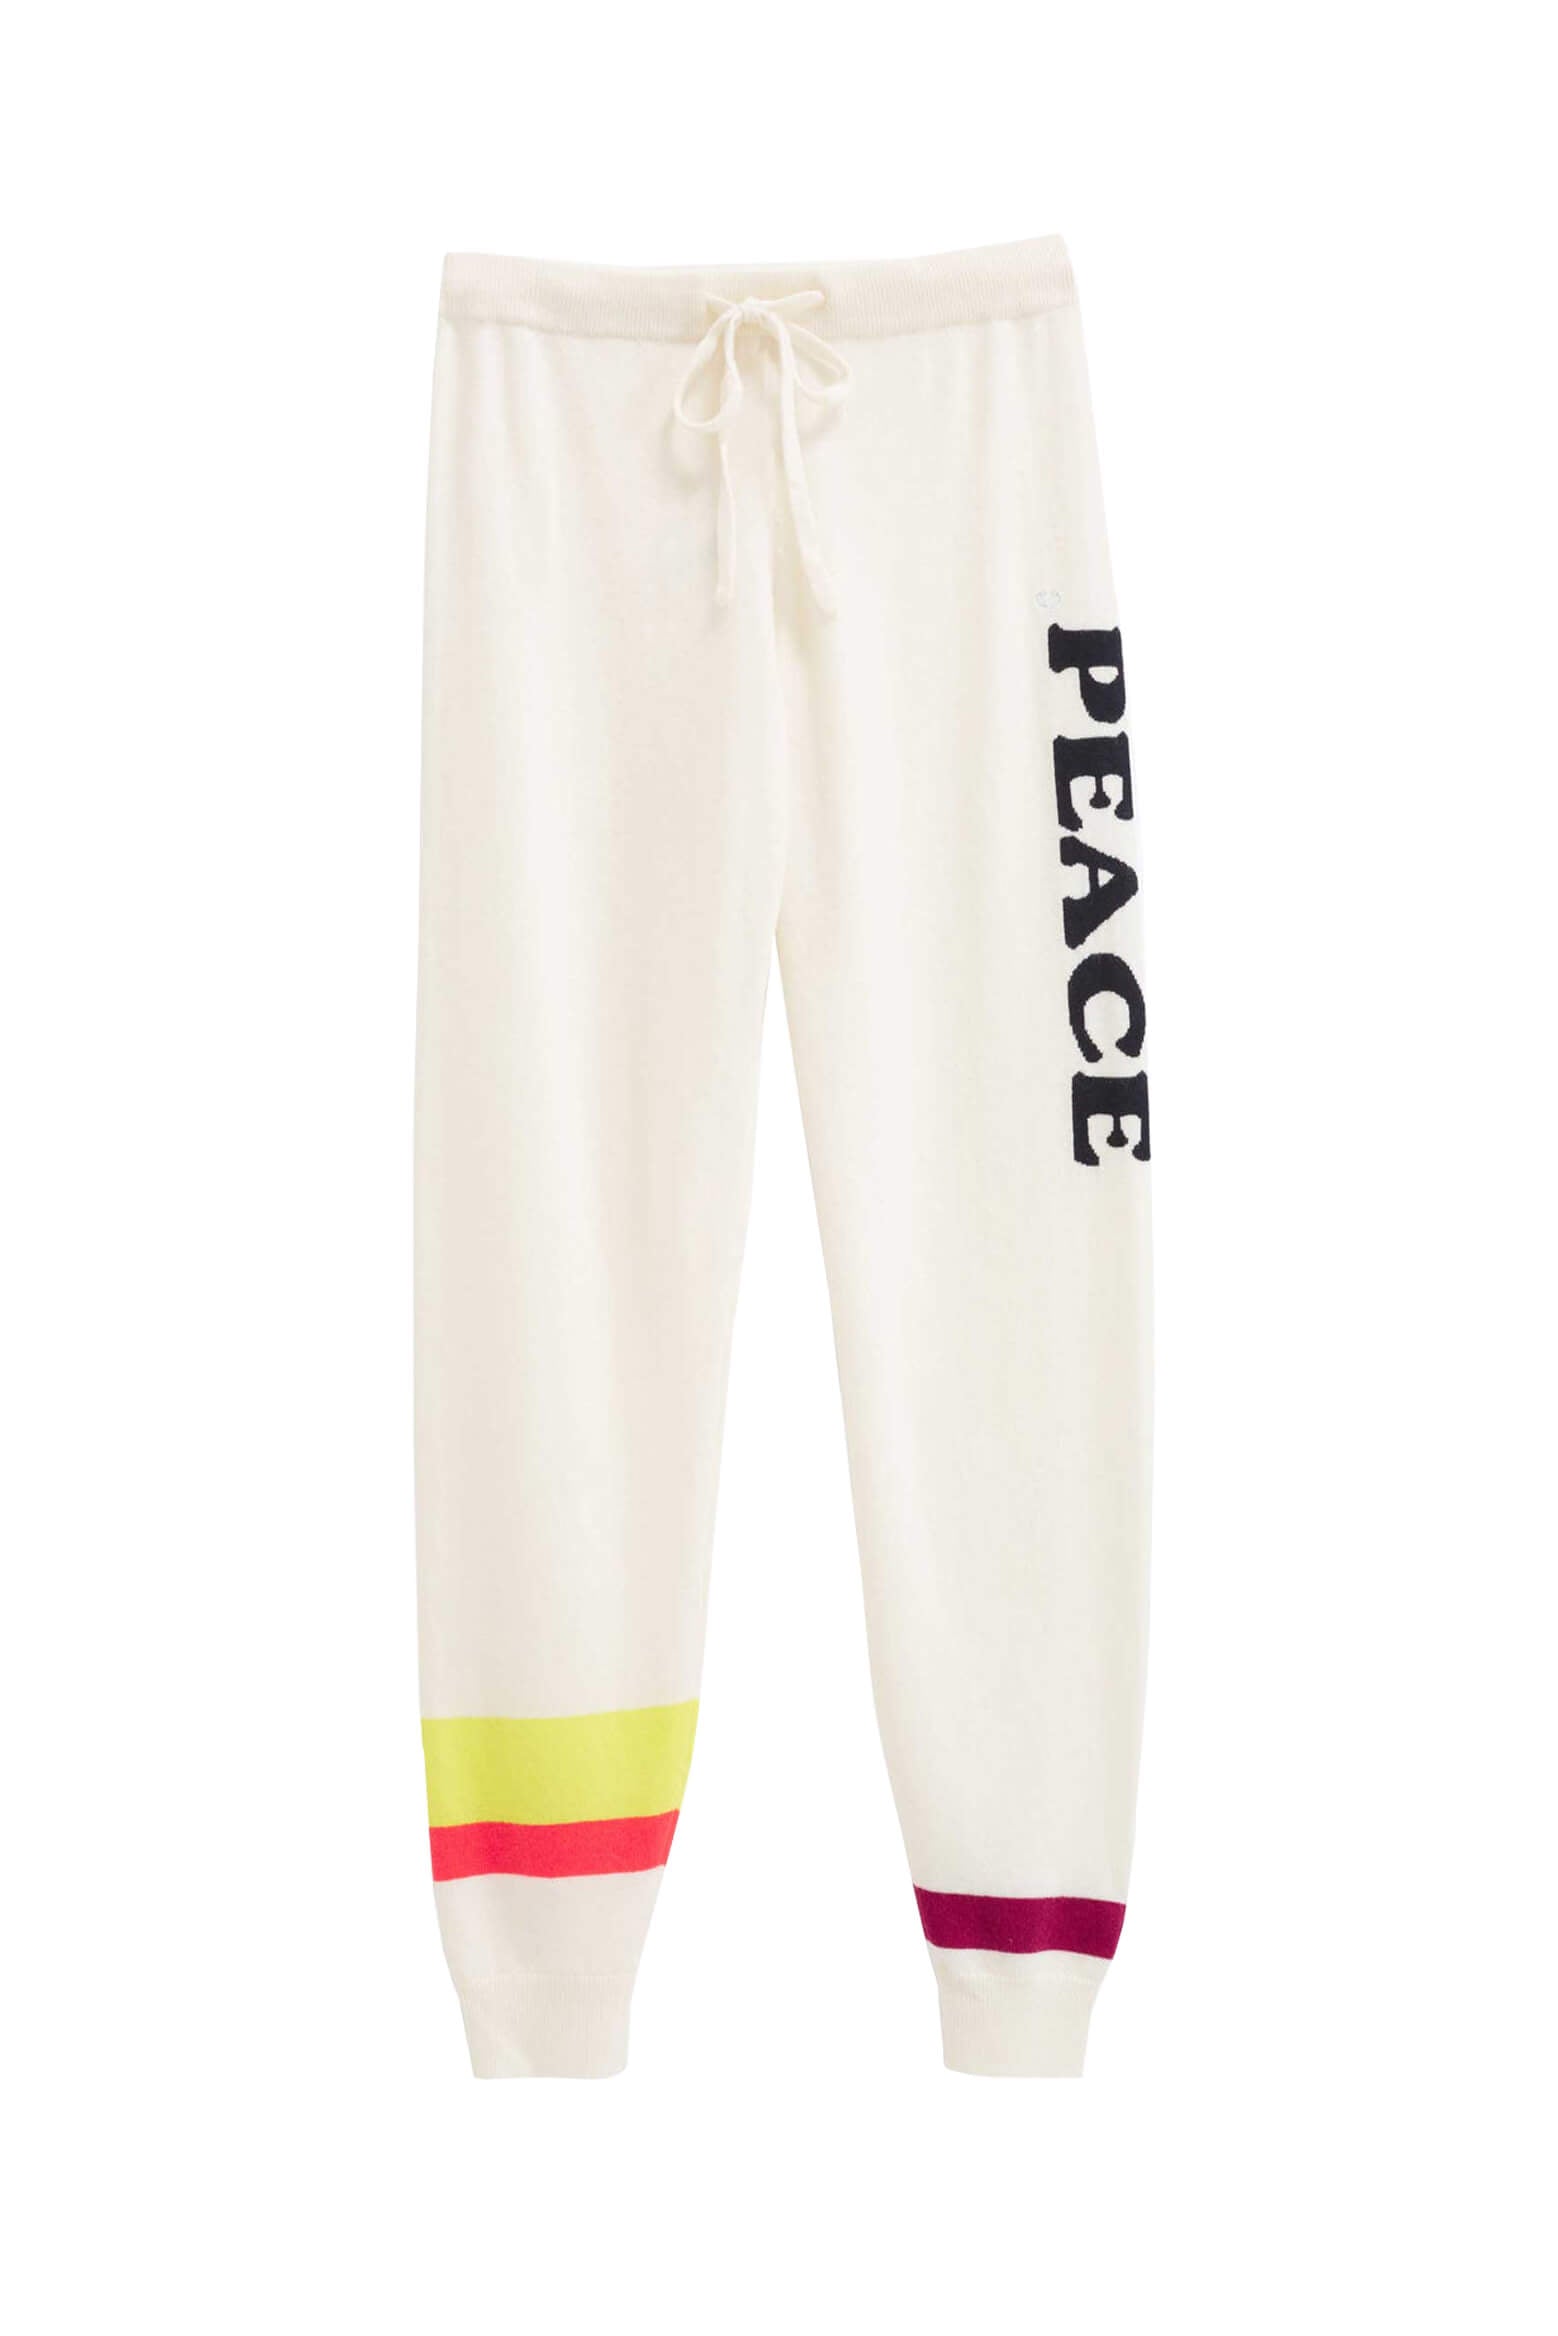 Chinti & Parker Peace & Love Trackpants in Cream Multi from The New Trend